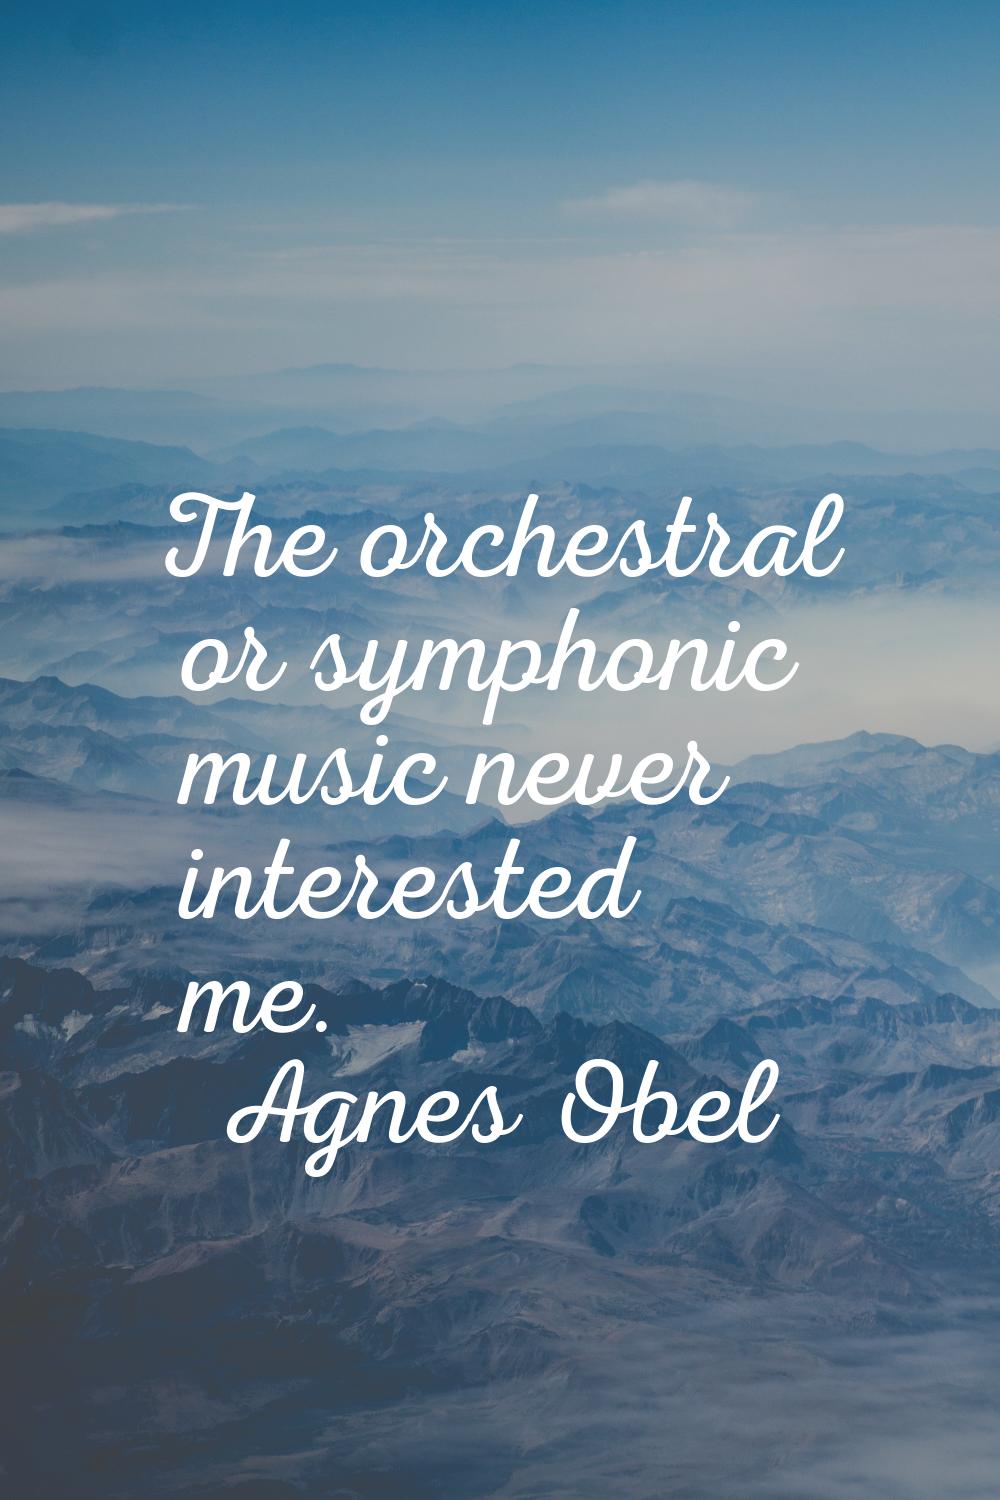 The orchestral or symphonic music never interested me.